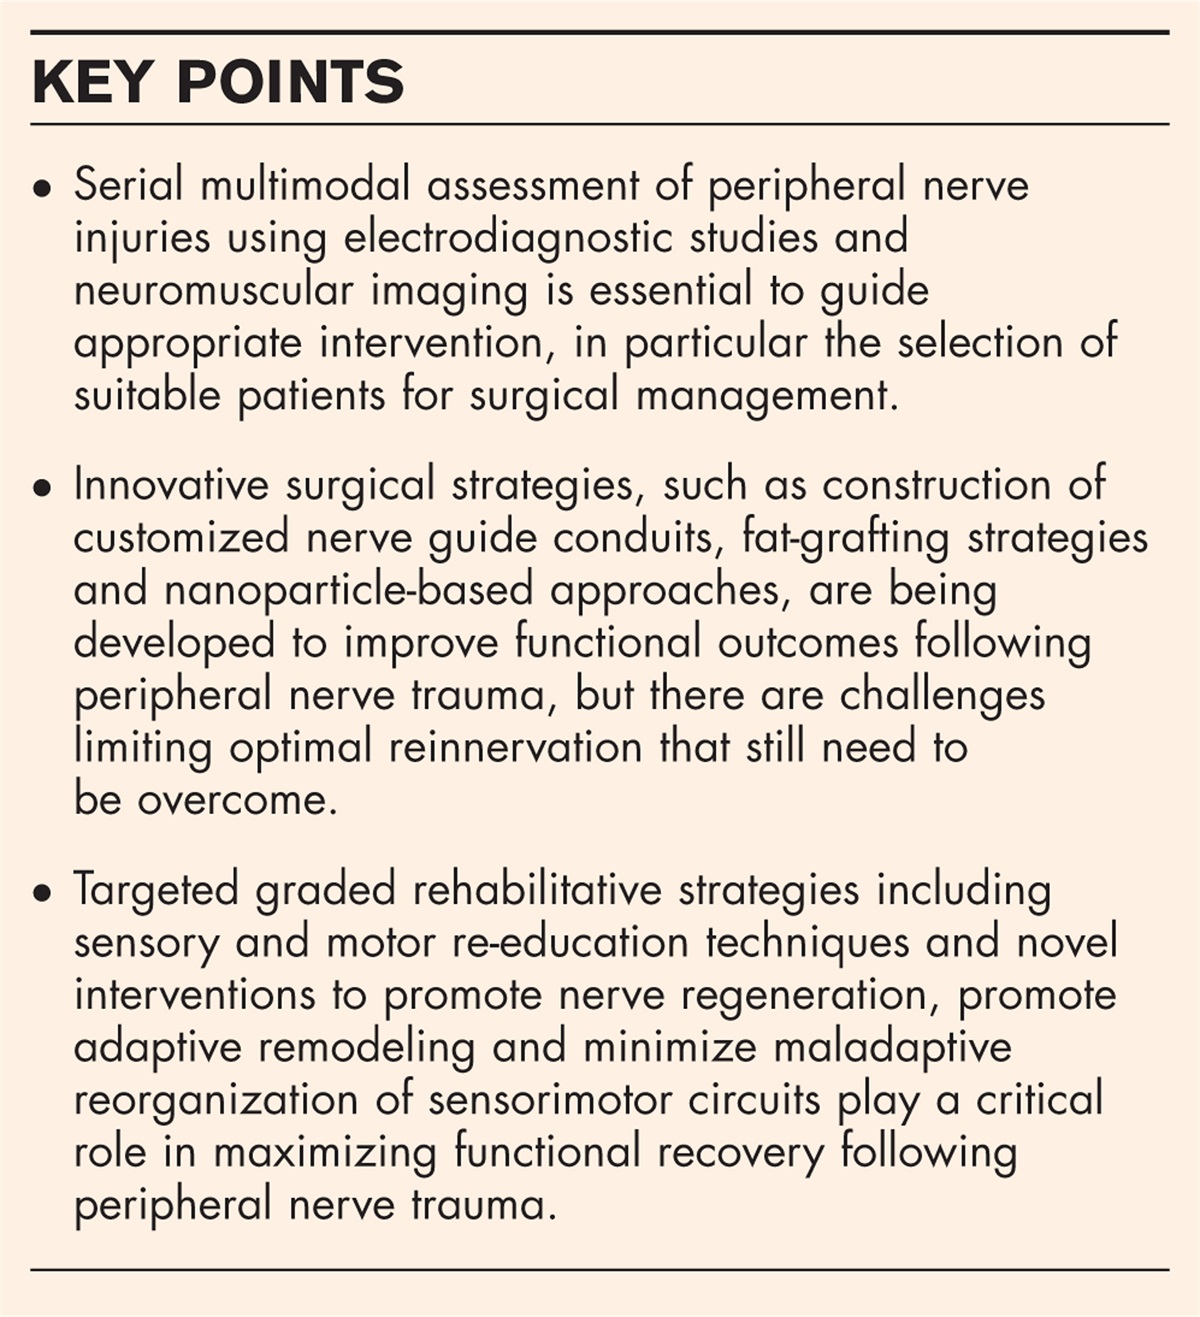 Traumatic peripheral nerve injuries: diagnosis and management